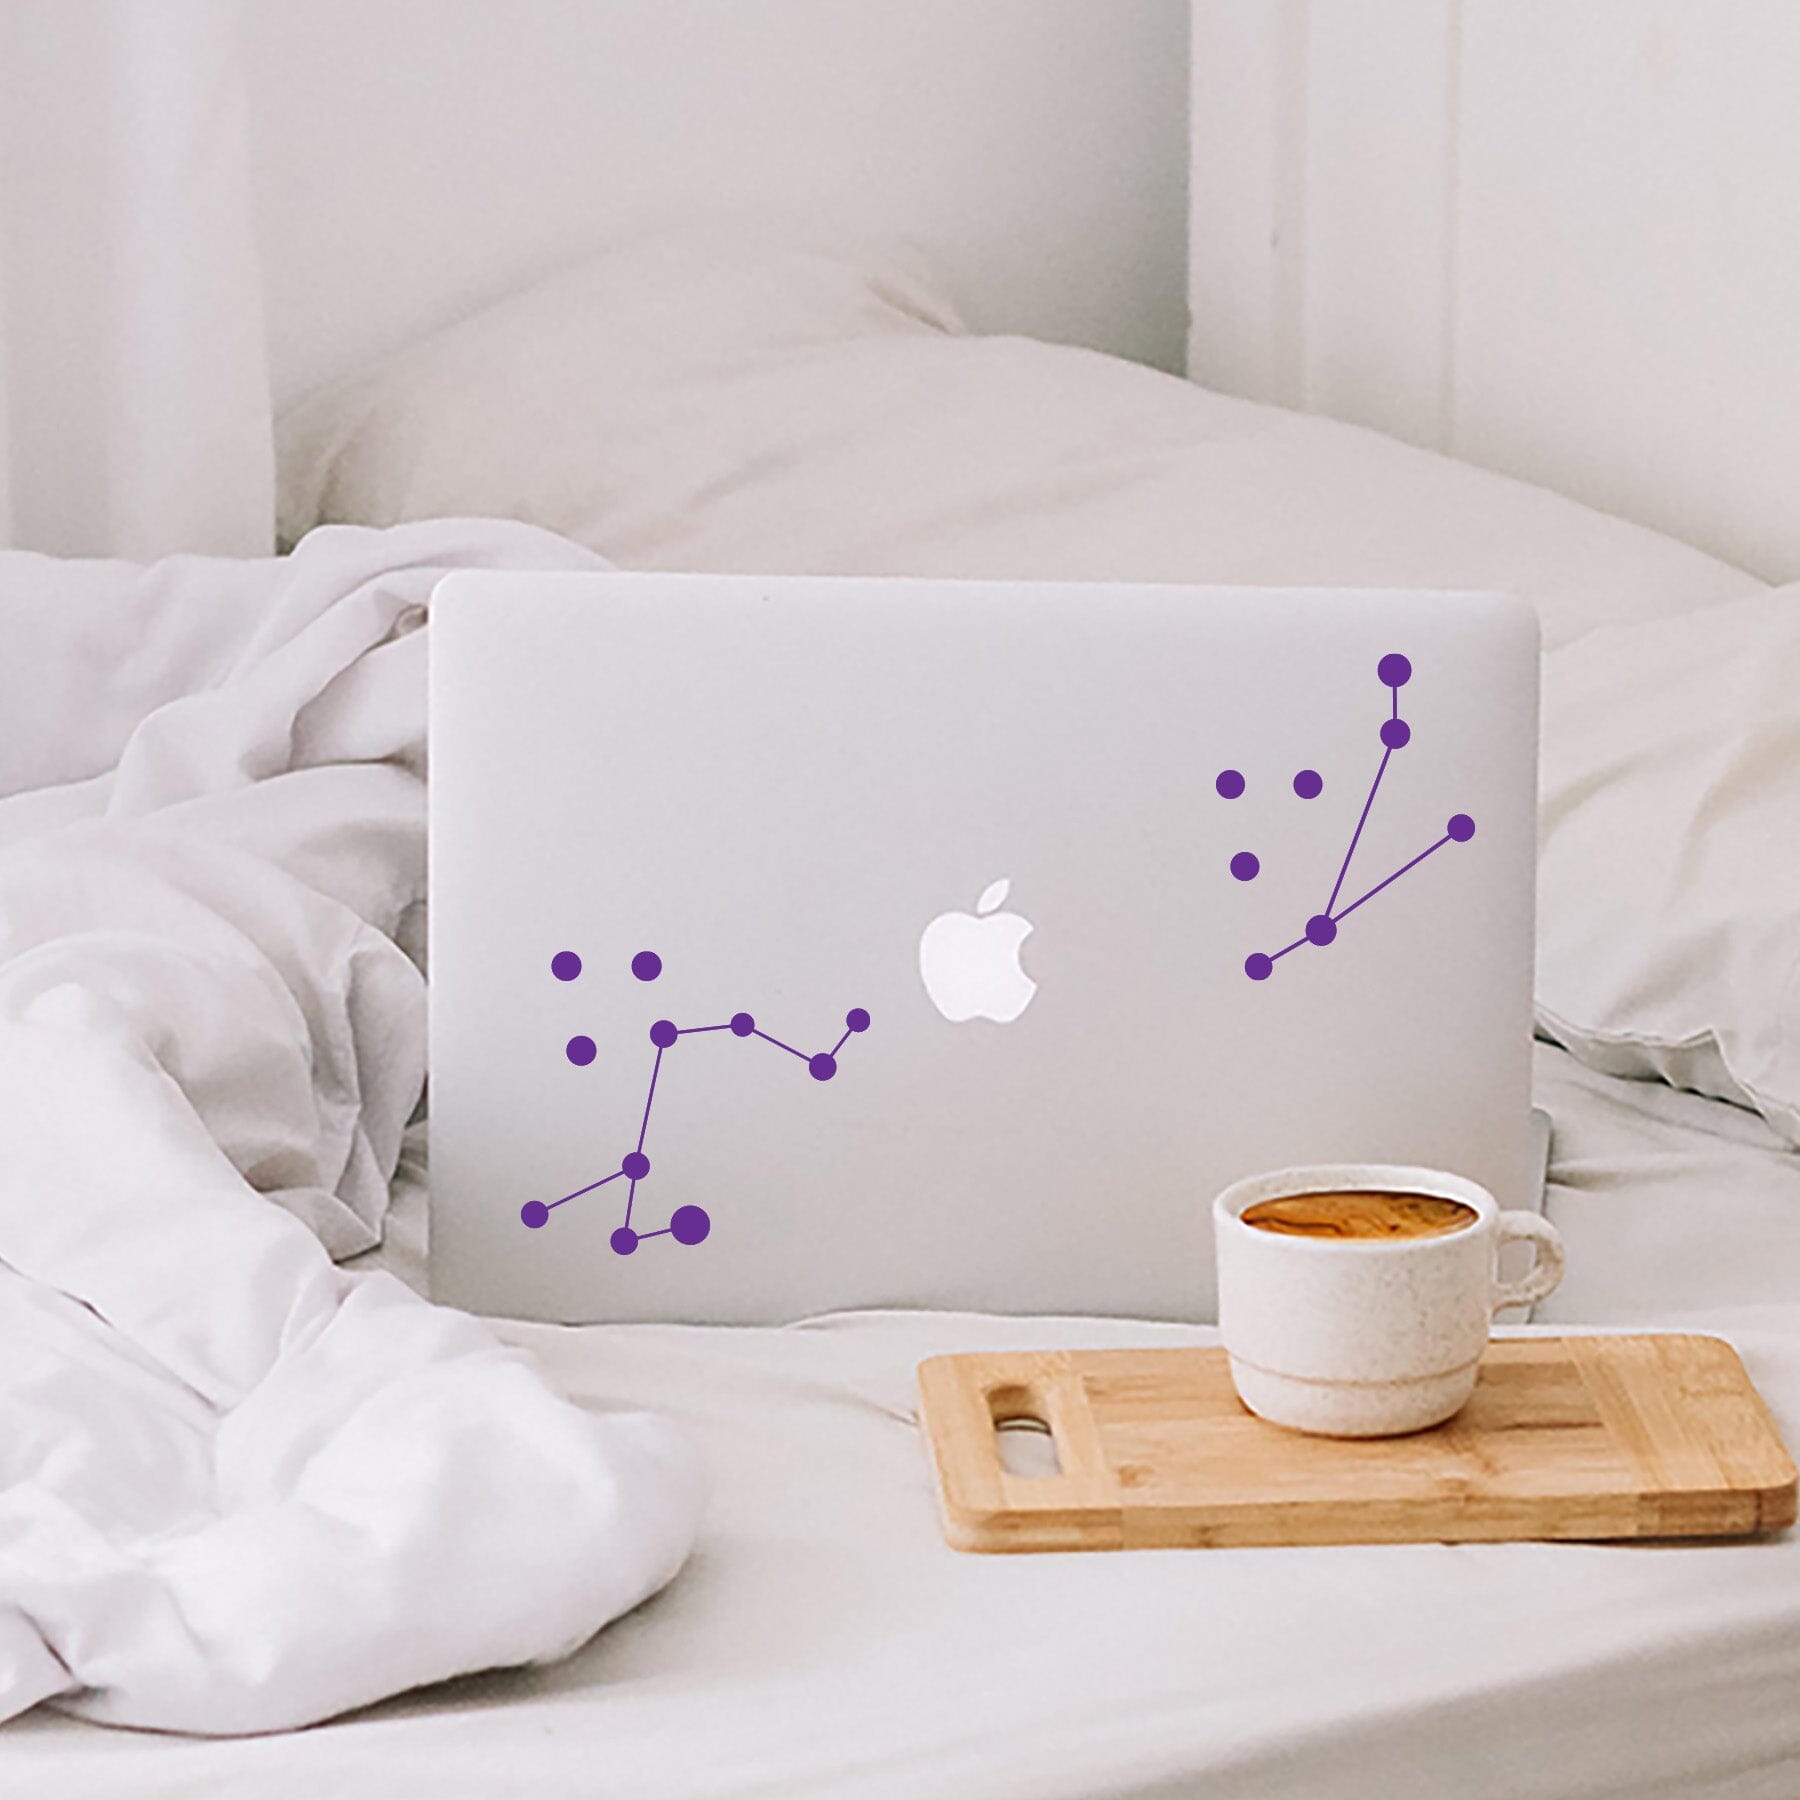 constellation wall decals - wall art - stickers - wall decor - purple